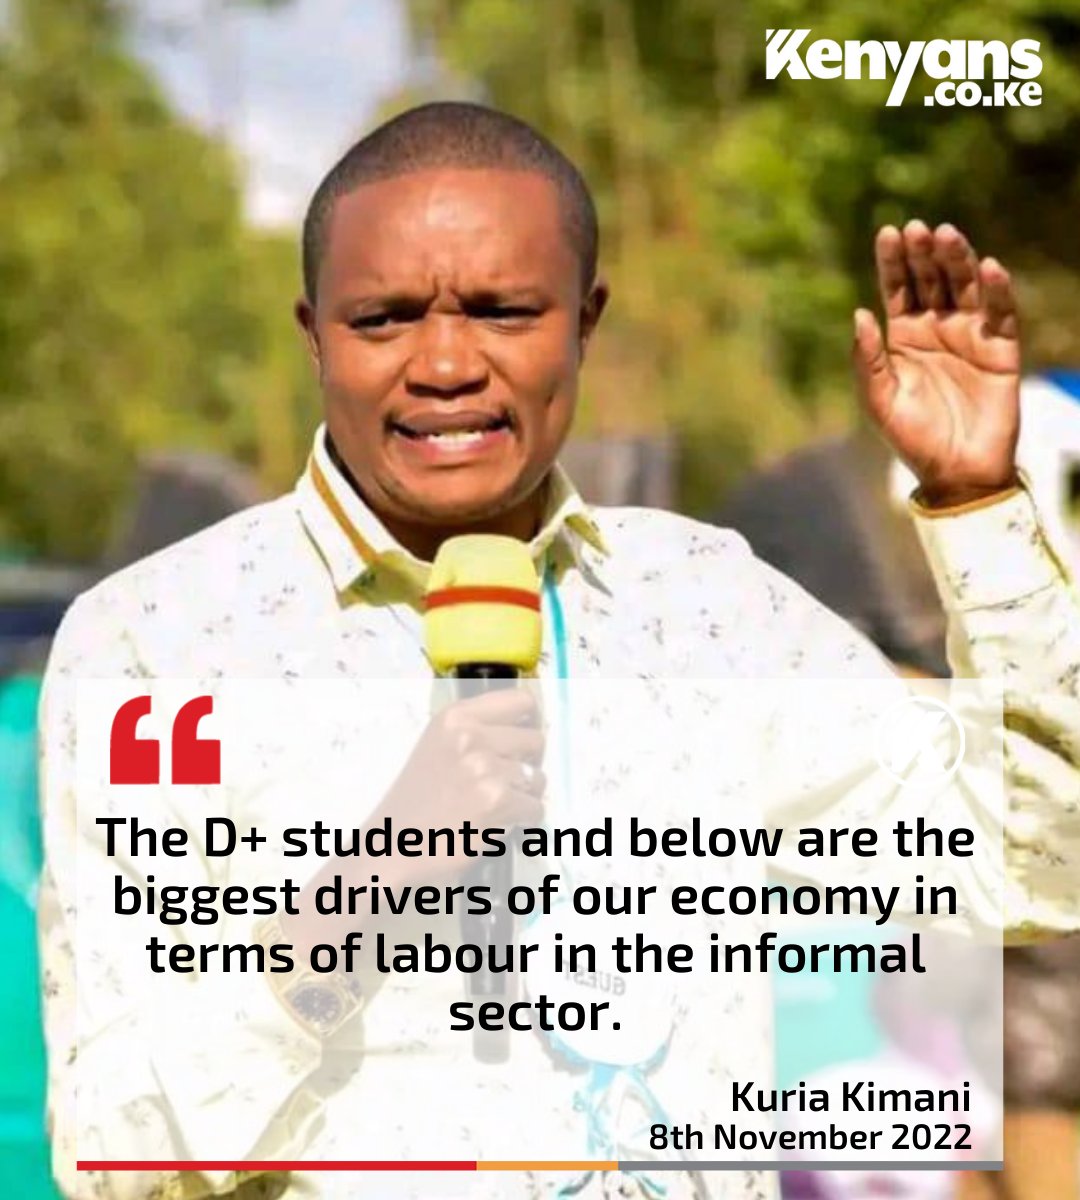 The D+ students and below are the biggest drivers of our economy in the informal sector – Kuria Kimani